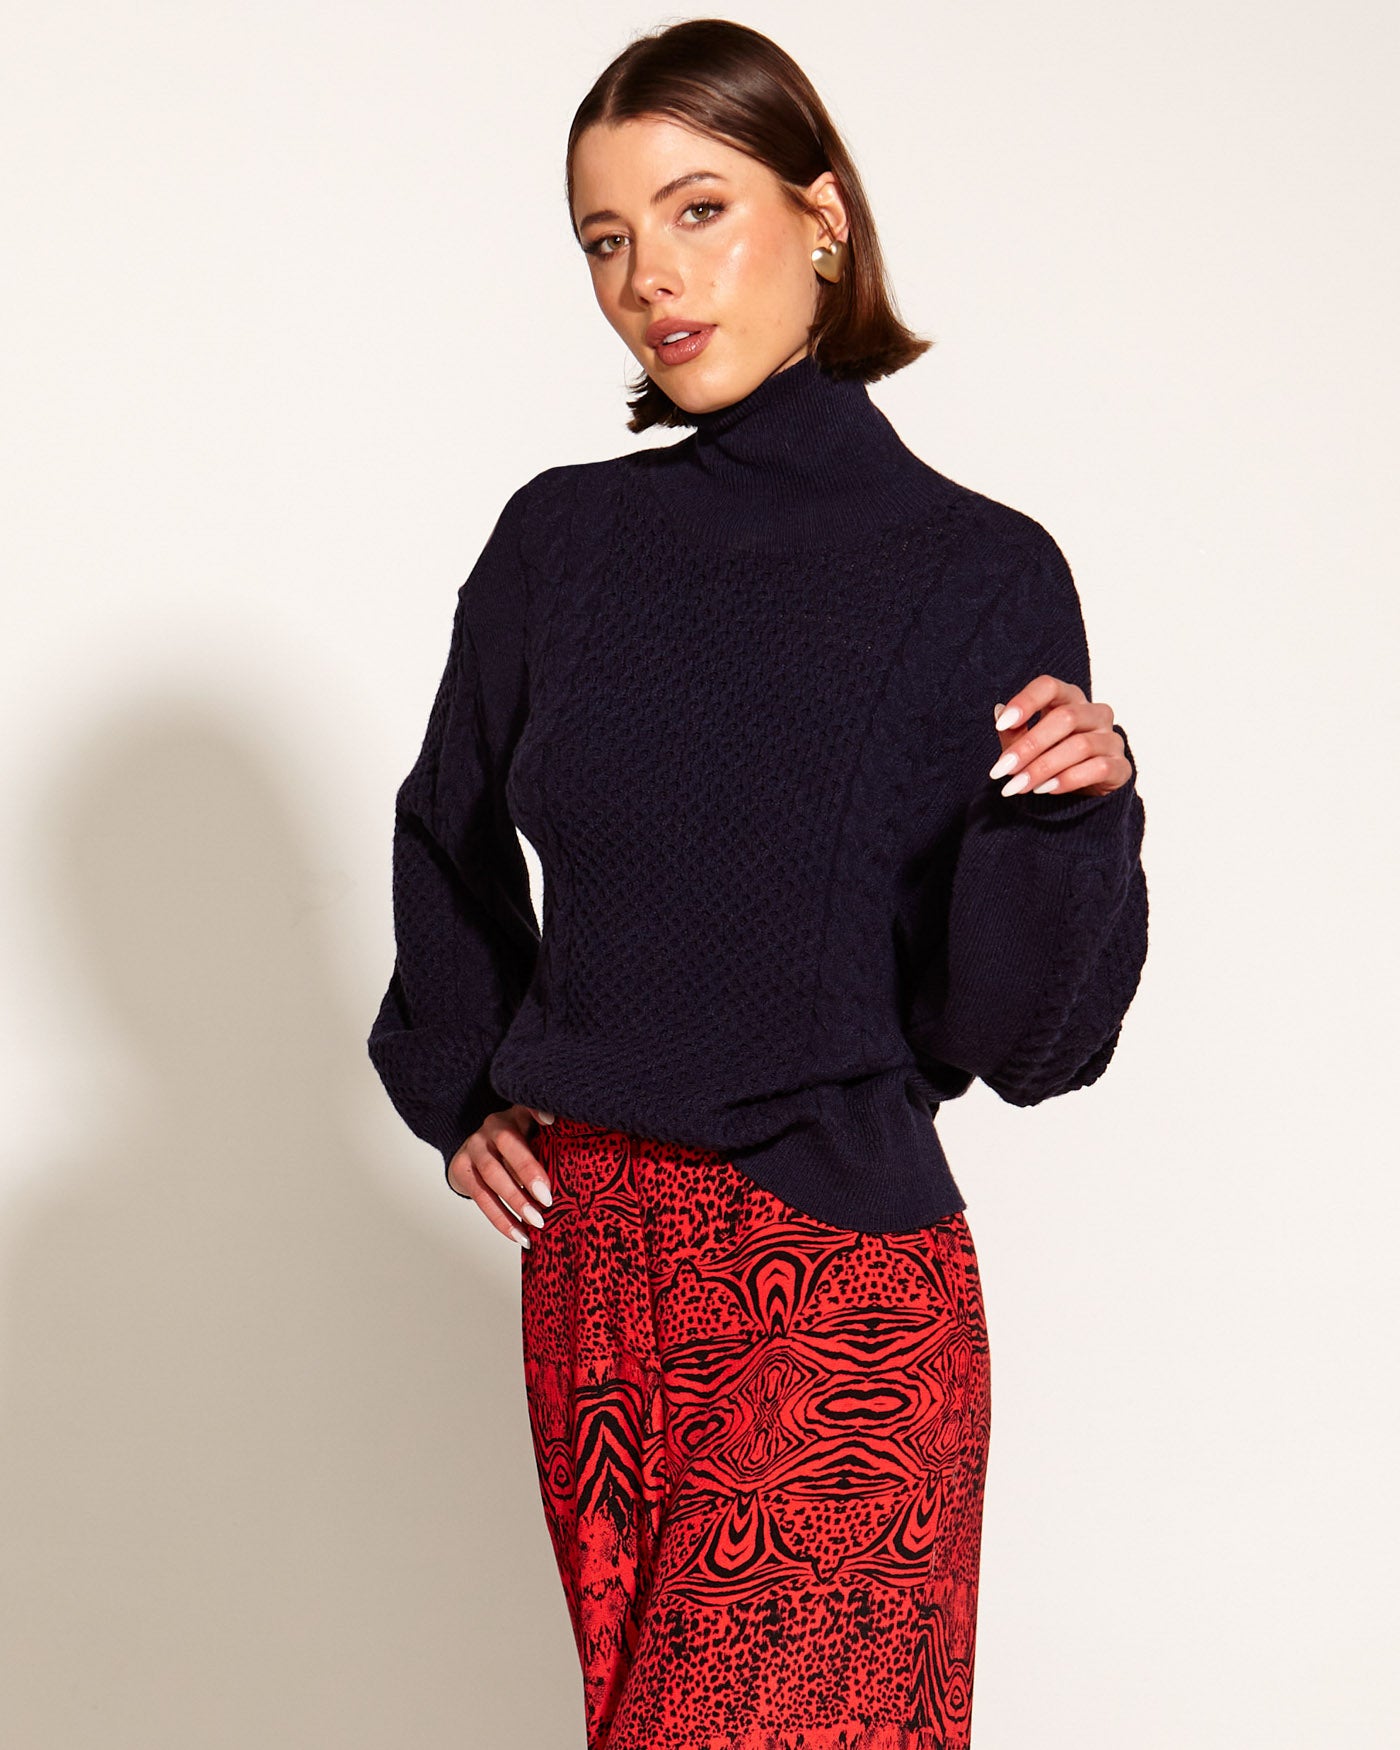 Treasure Turtleneck Cable Knit - Navy